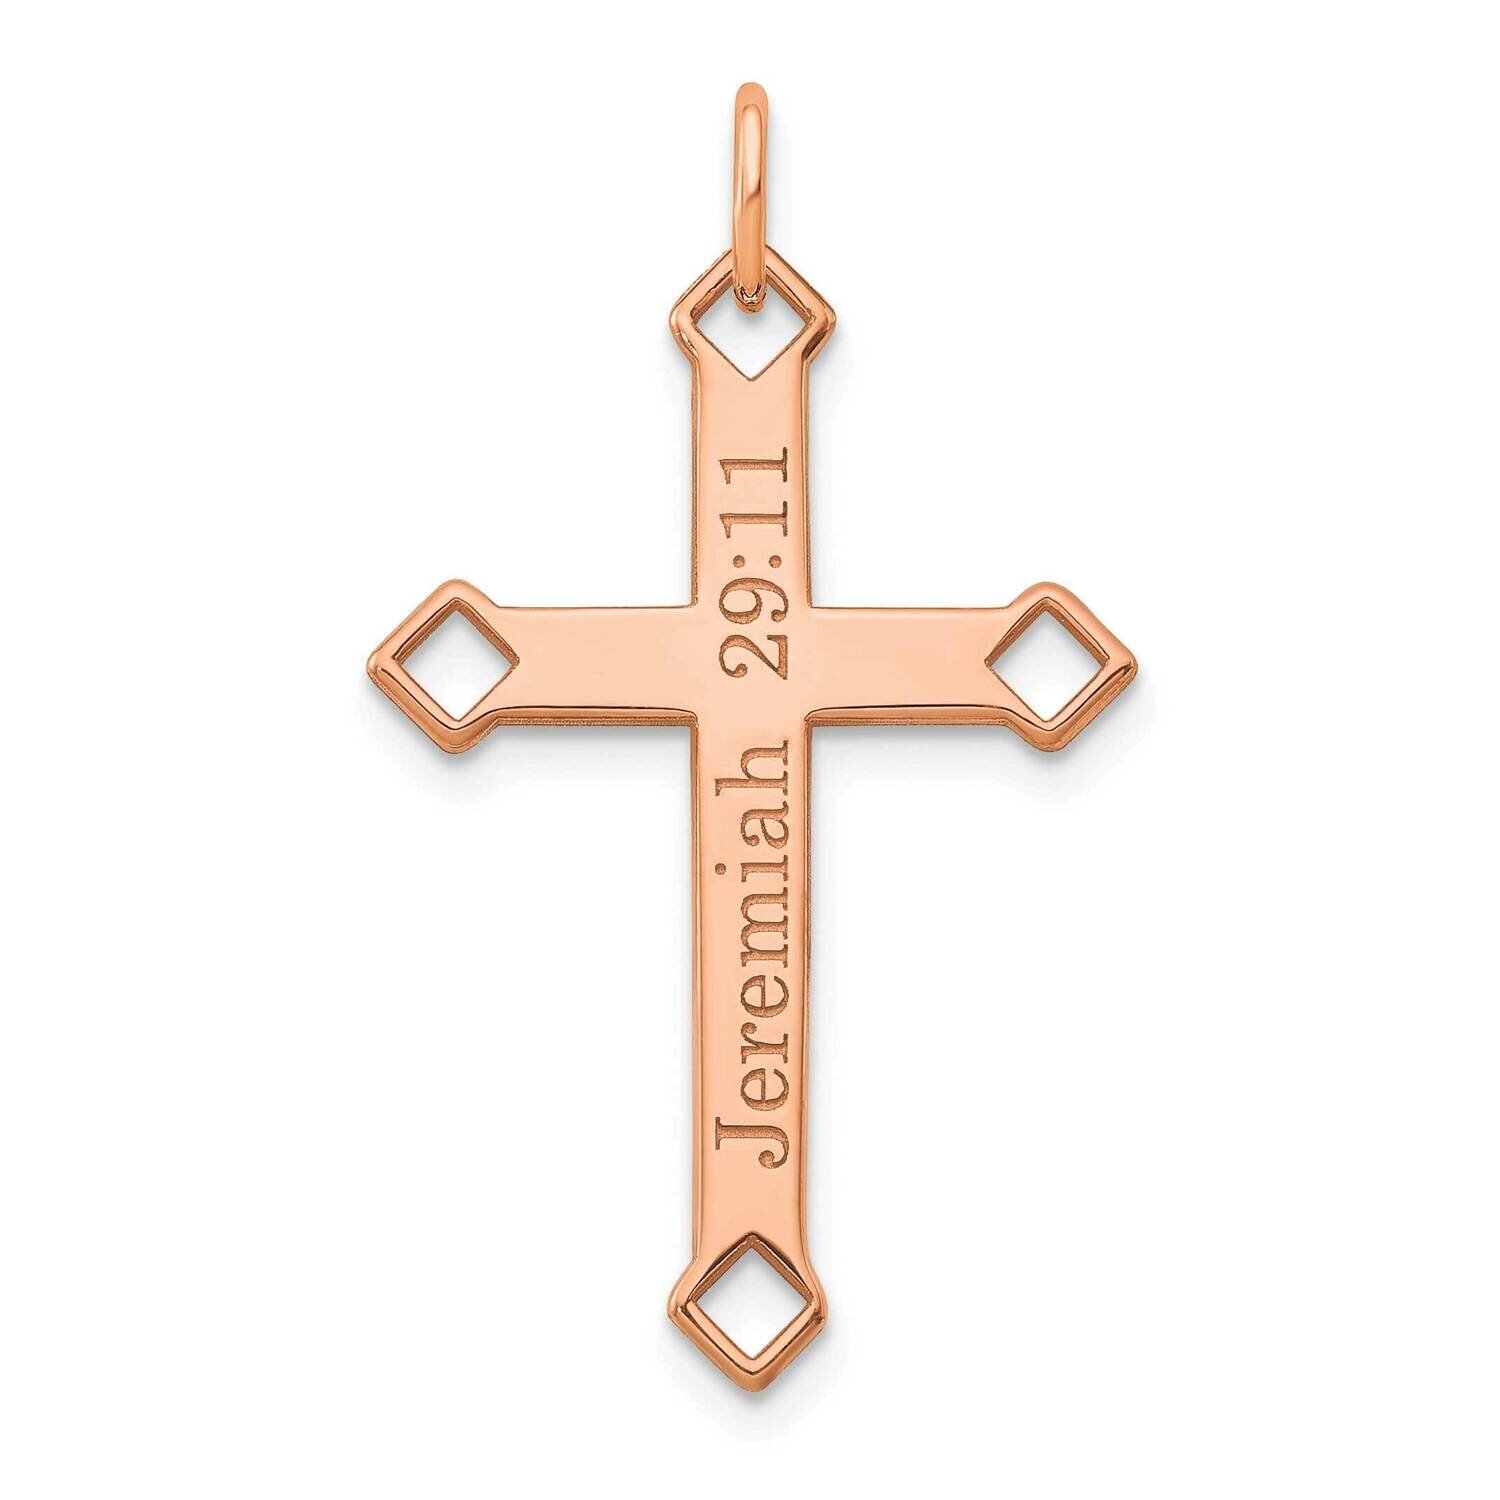 Personalized Cross Charm 14k Rose Gold XNA978R